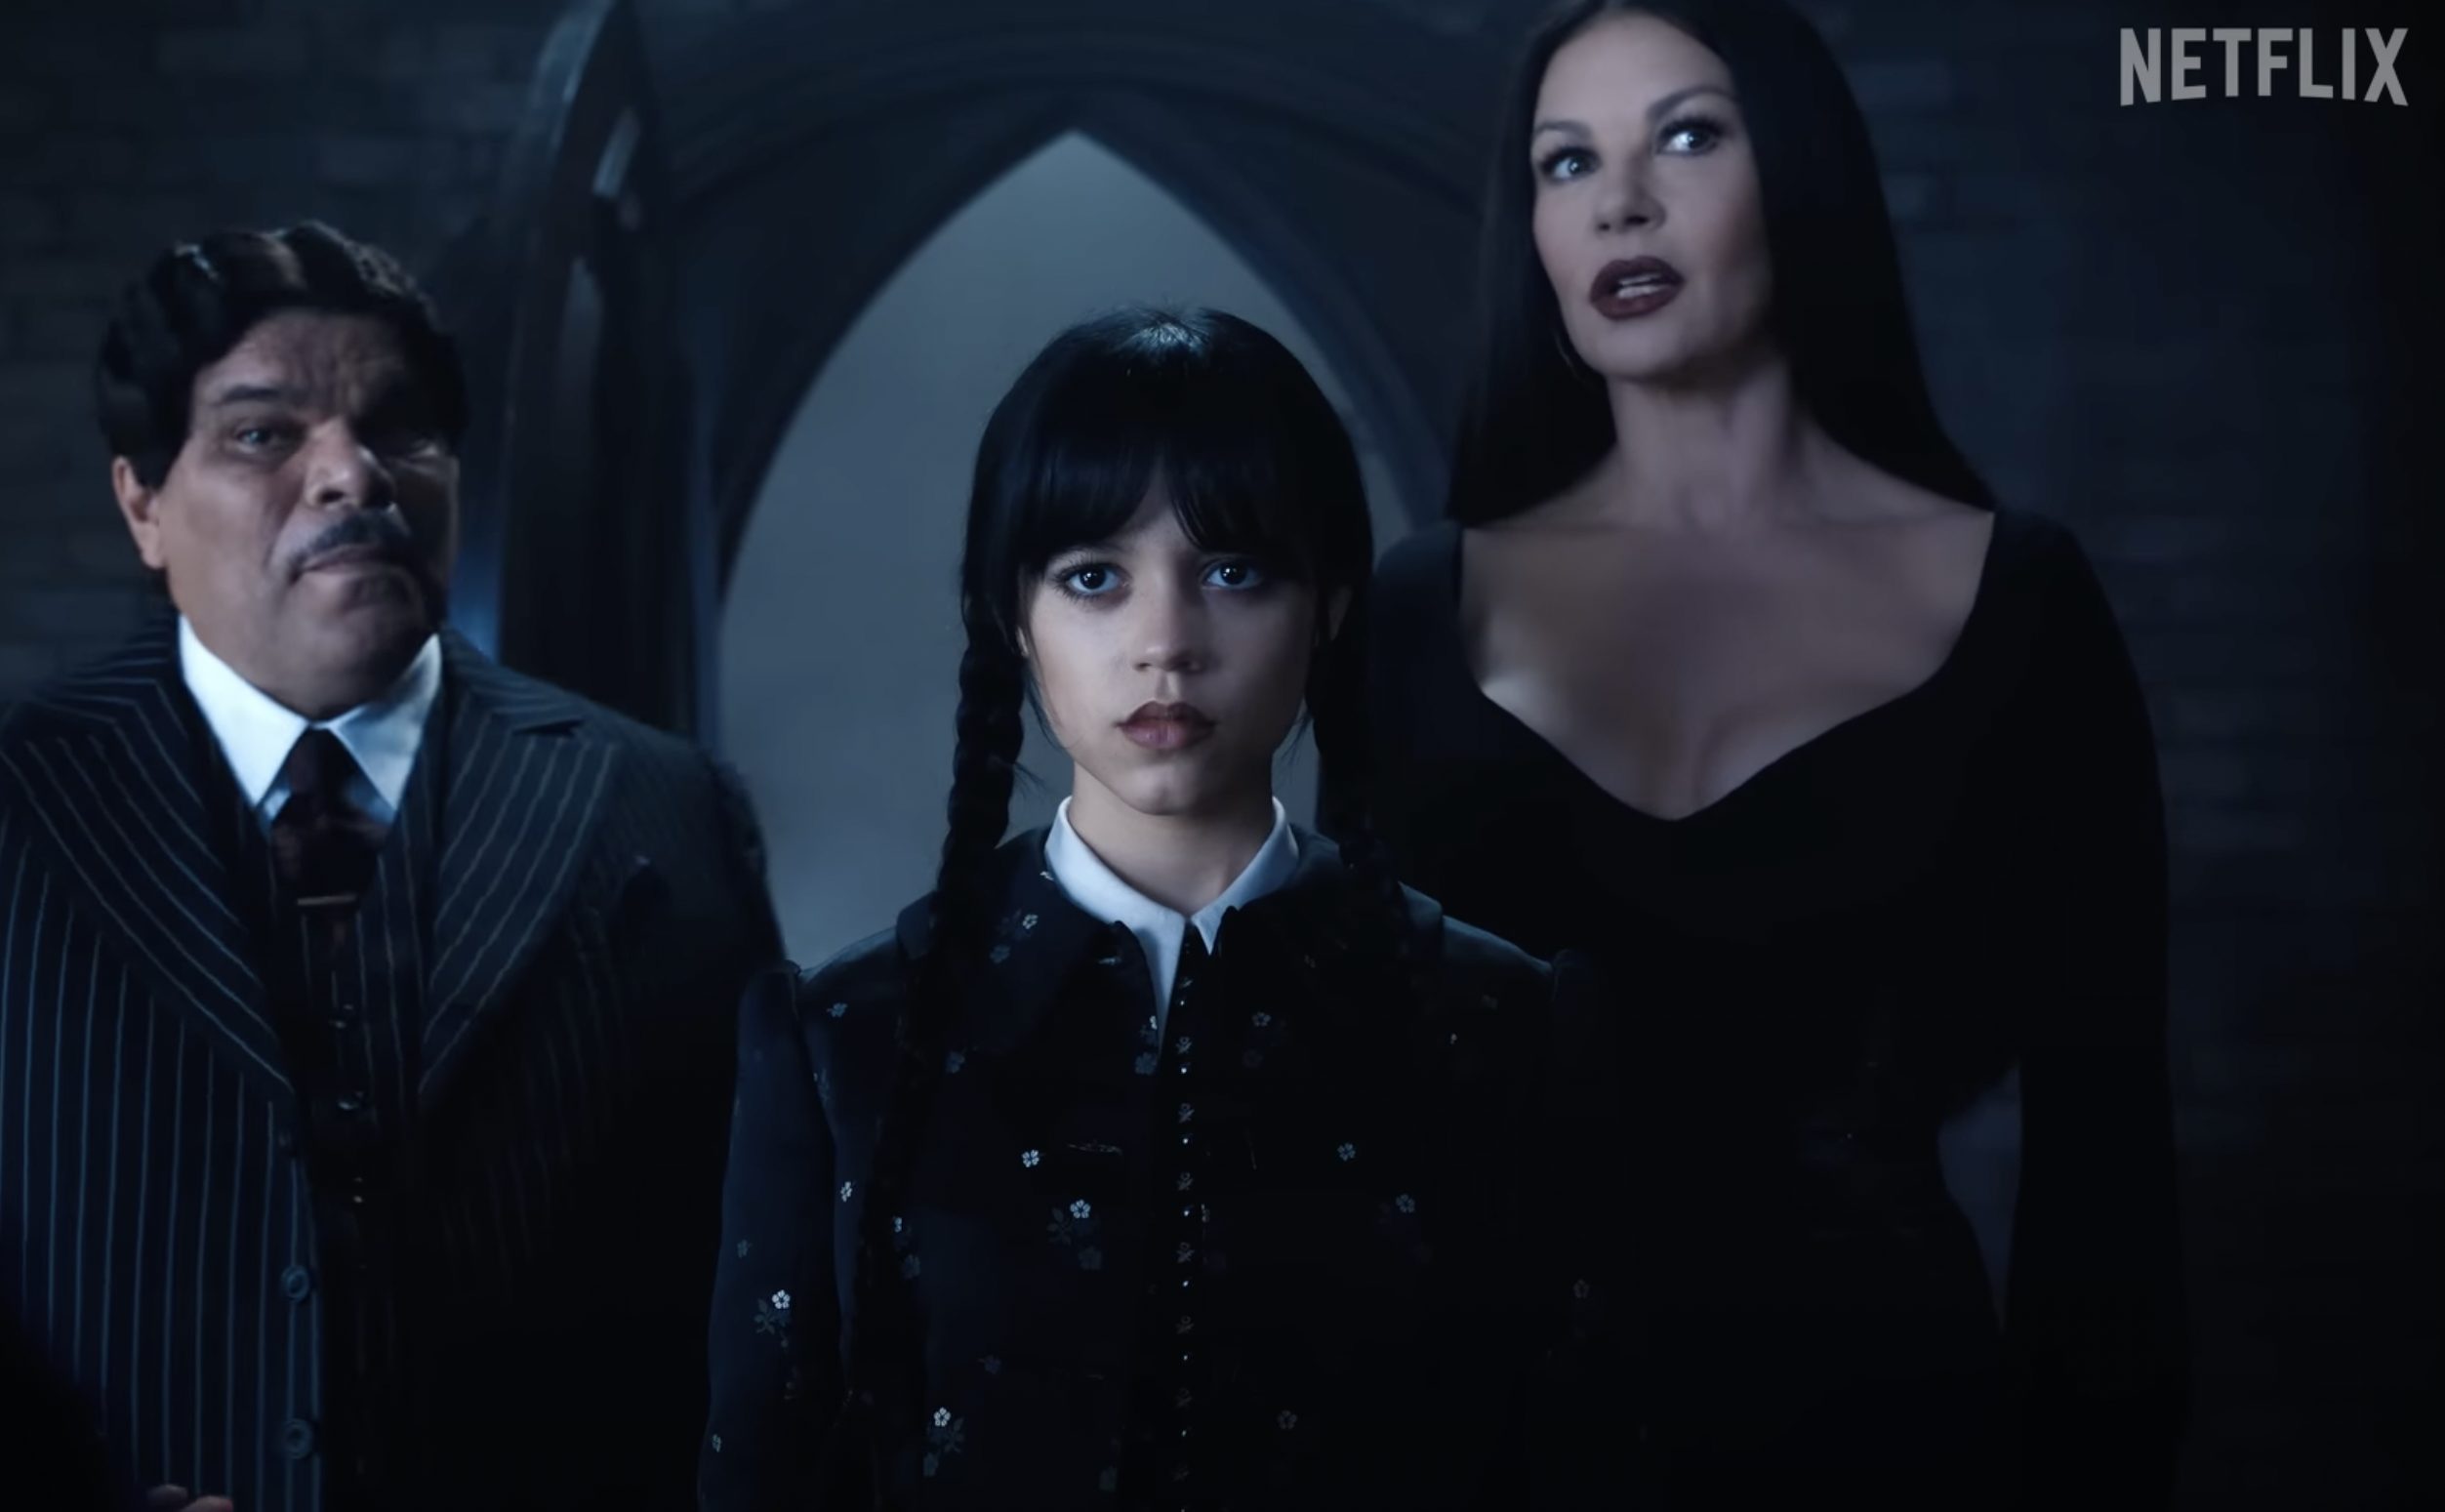 Wednesday Review: The Netflix Algorithm Ate Wednesday Addams - TV Guide